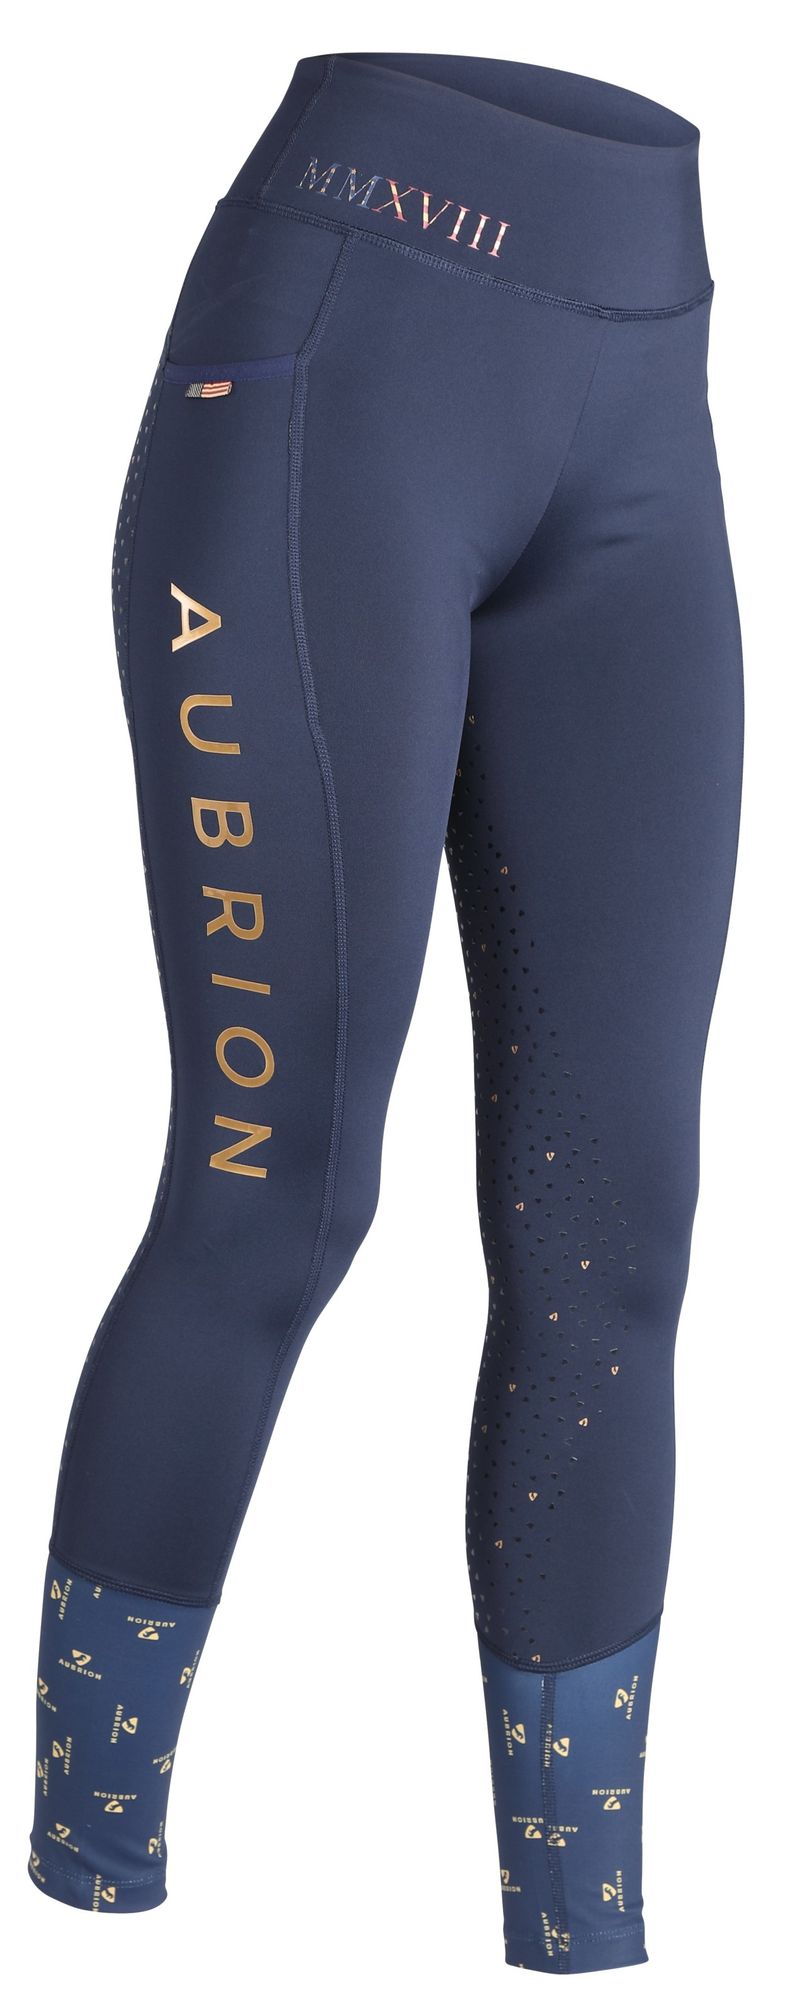 Shires Aubrion Stanmore Horse Riding Tights Ladies in Navy Large Navy 